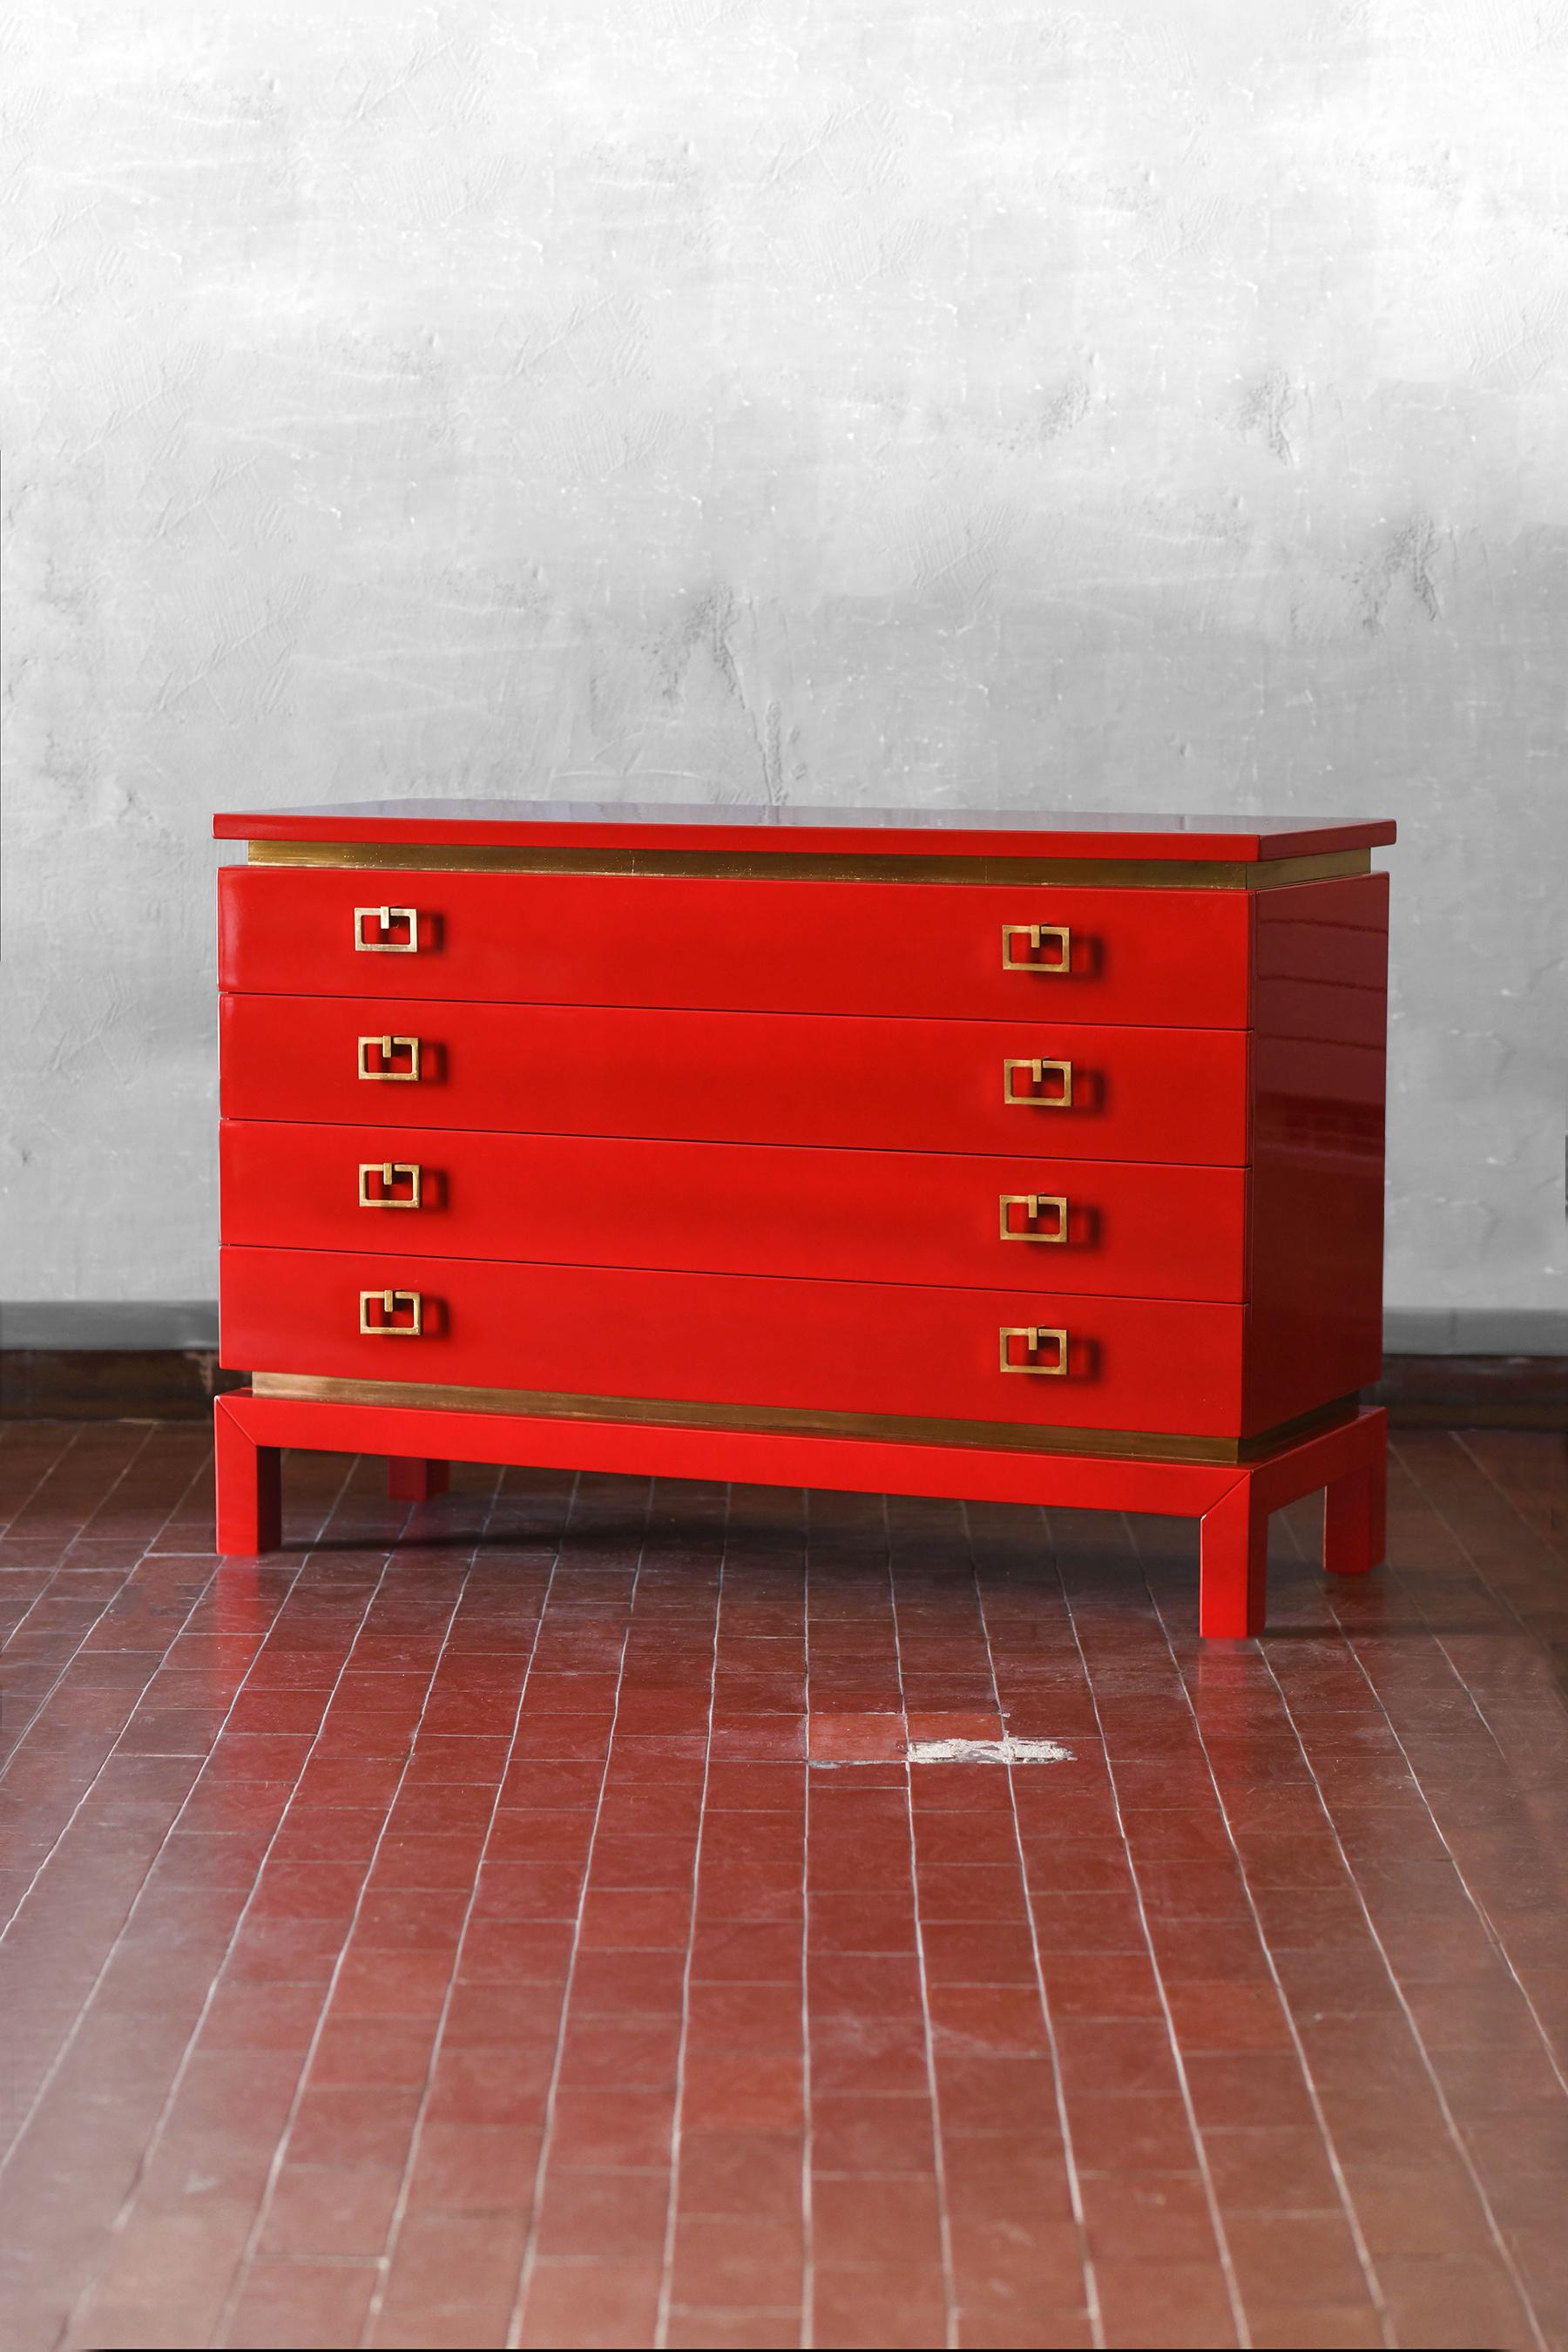 China Red chest of drawers with brass details from the 1970s – Lacquered Series
Product details
Dimensions 132 L x 87 H x 50 D cm